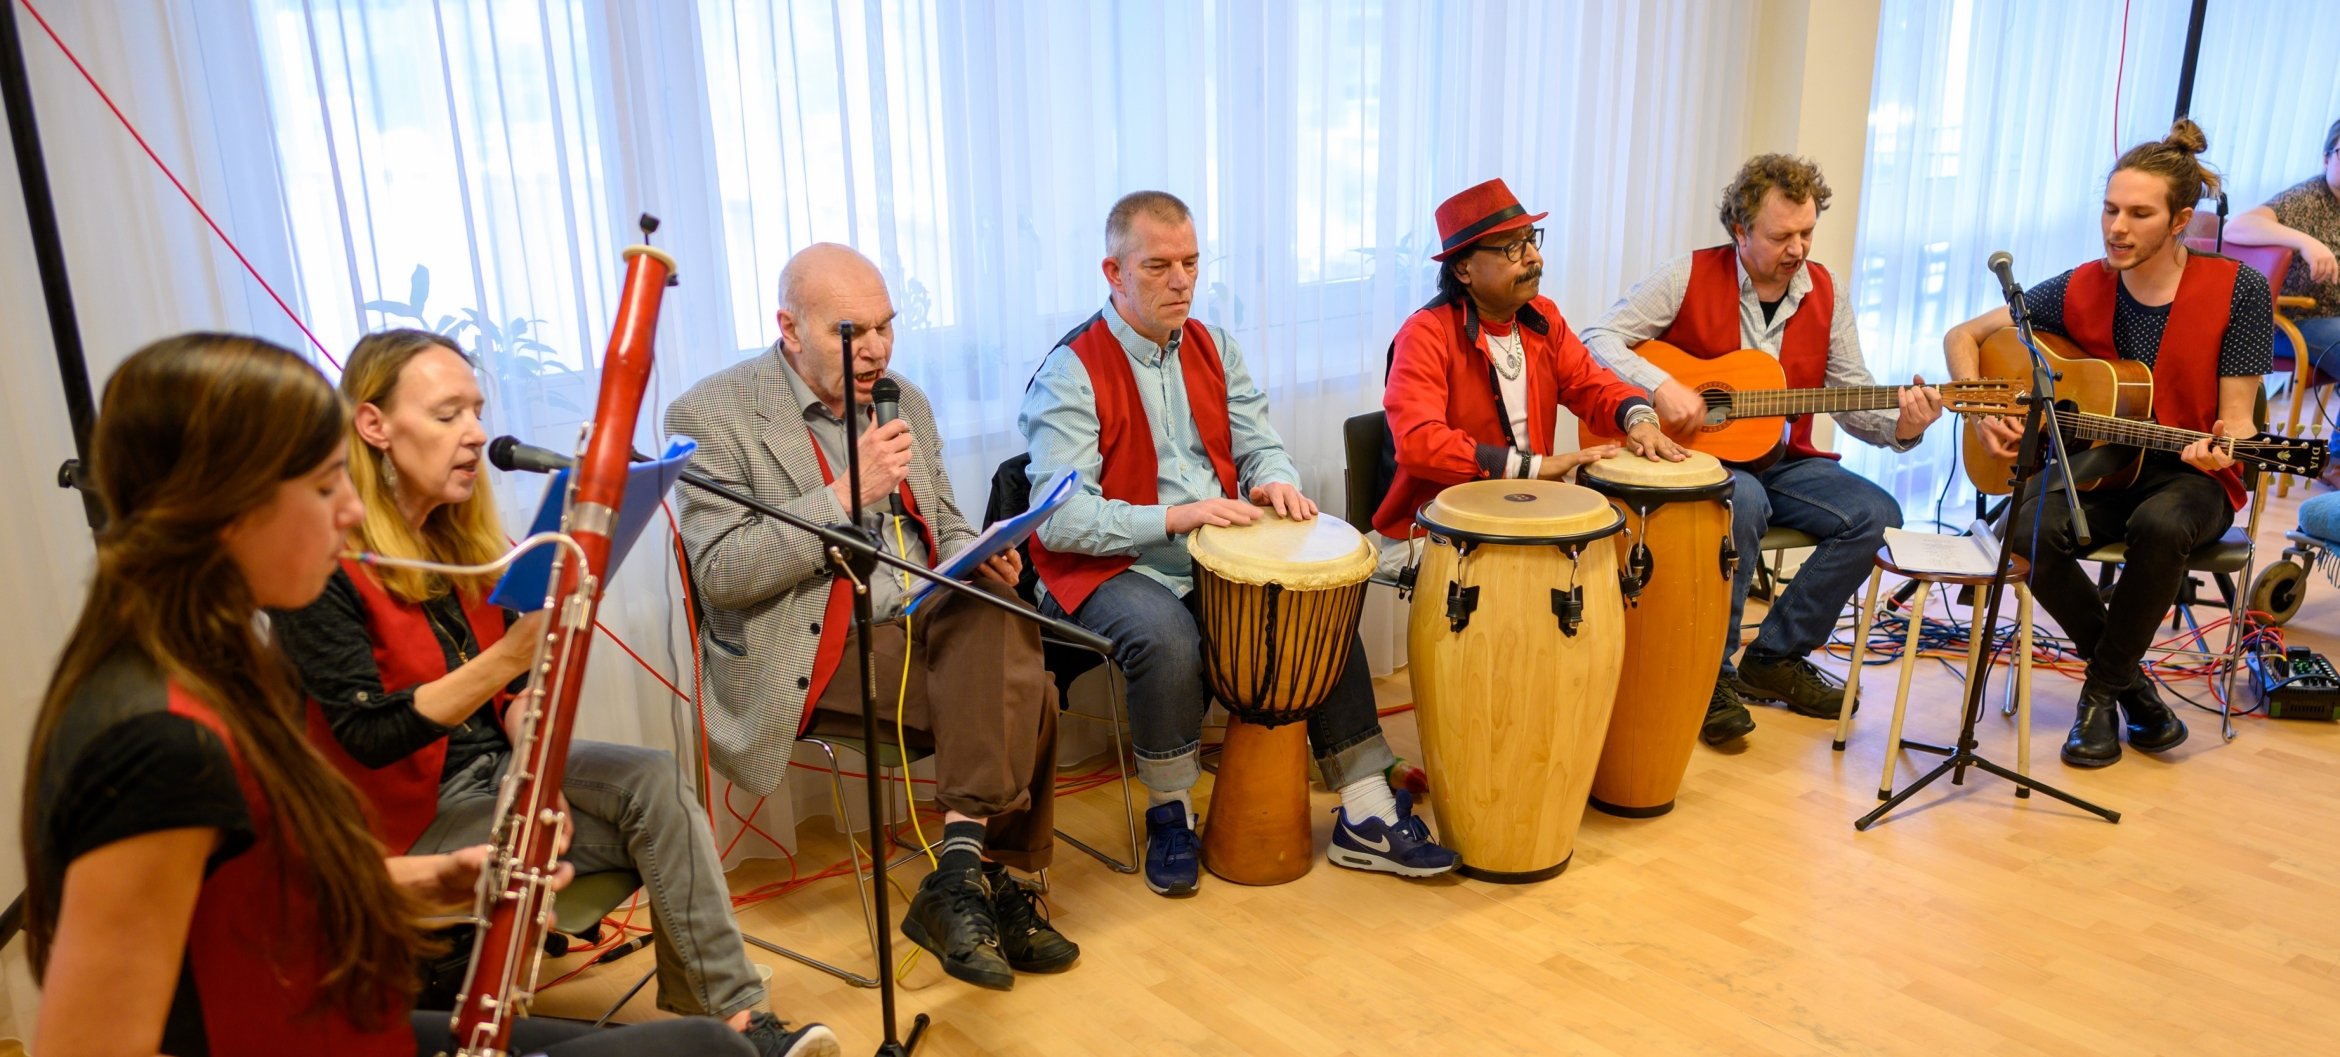 The residents of the Domus house band play the music of their youth, revisiting good memories from the past.